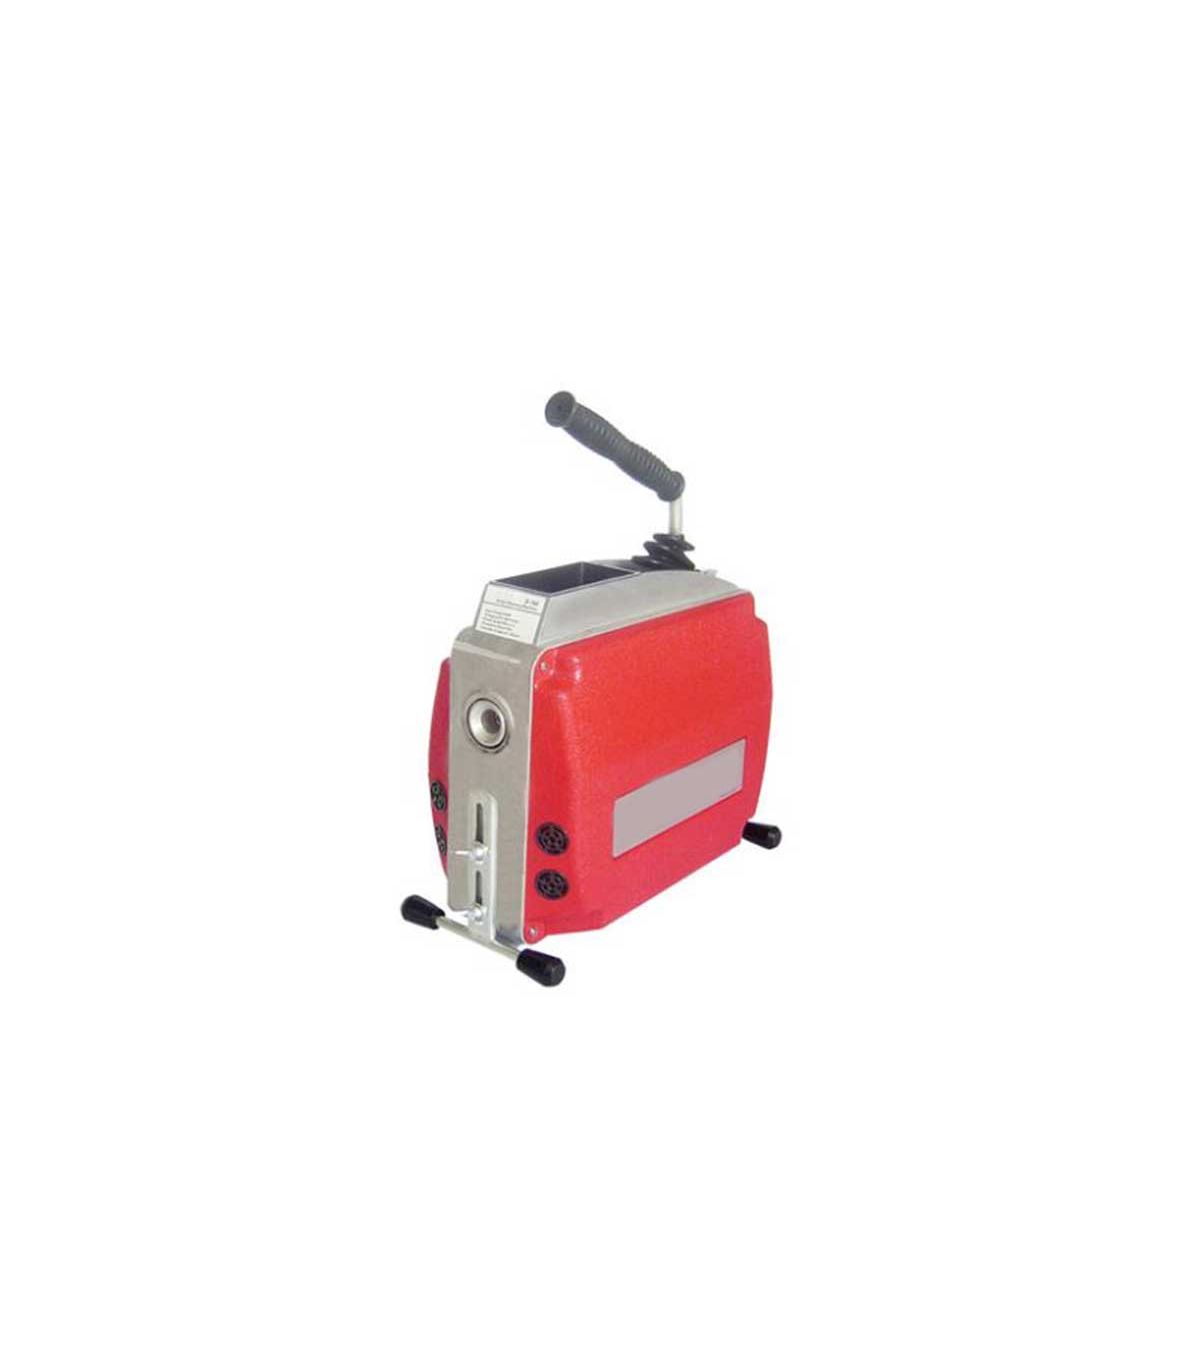 RSCo electric sewer cleaning machine model D-150